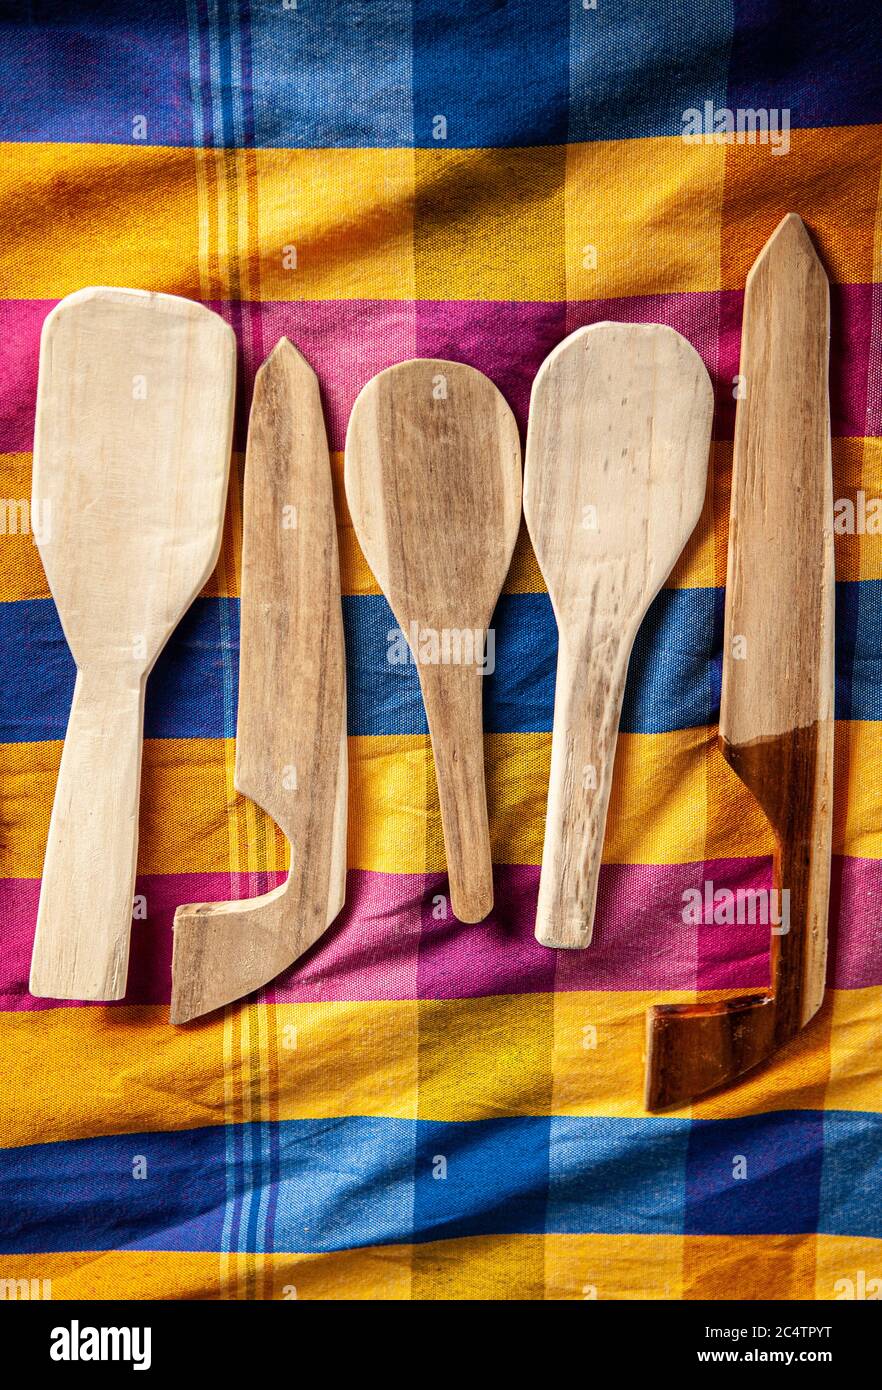 Village wooden cutlery set and kitchen tools on colourful asian style fabric background top view. Stock Photo